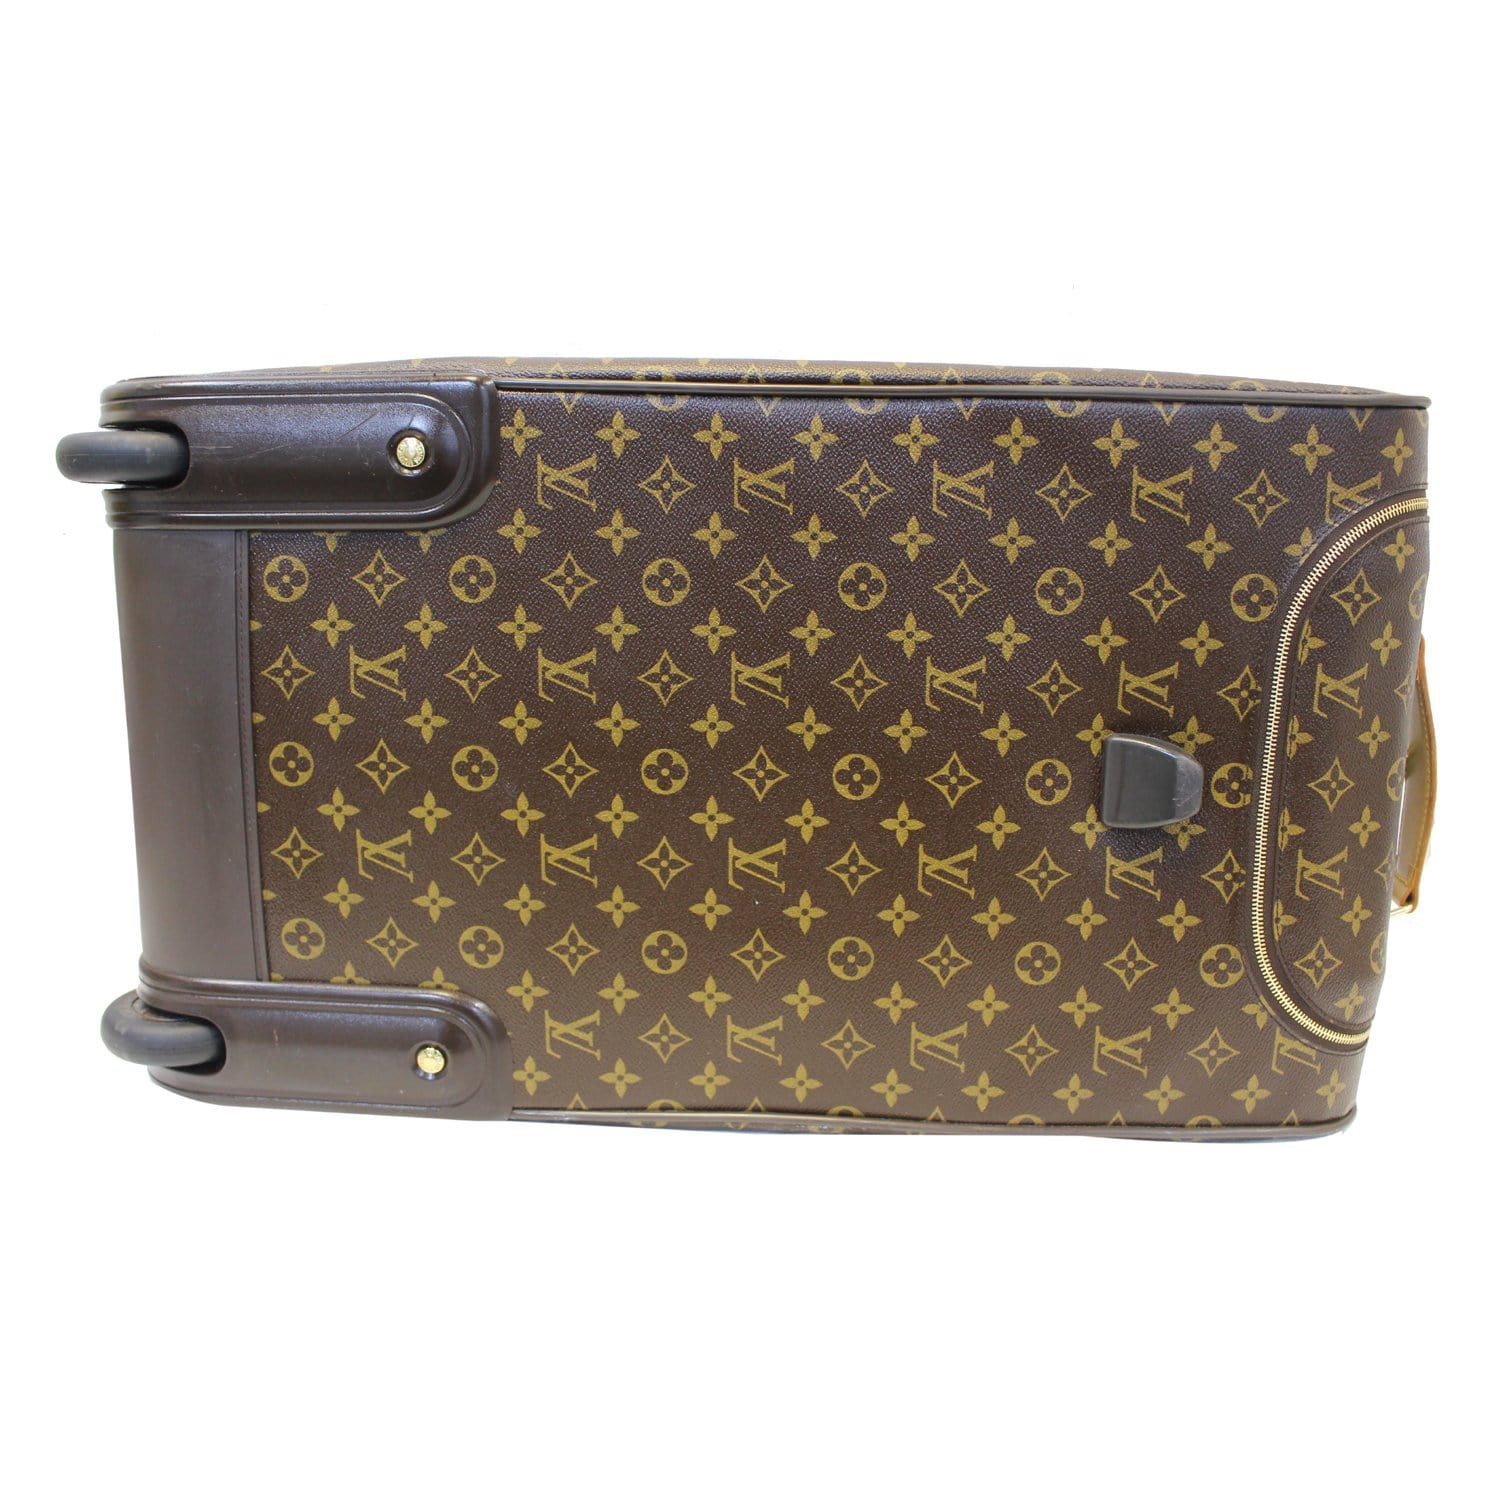 Louis Vuitton Monogram Eole 60 Carry-On With Wheels